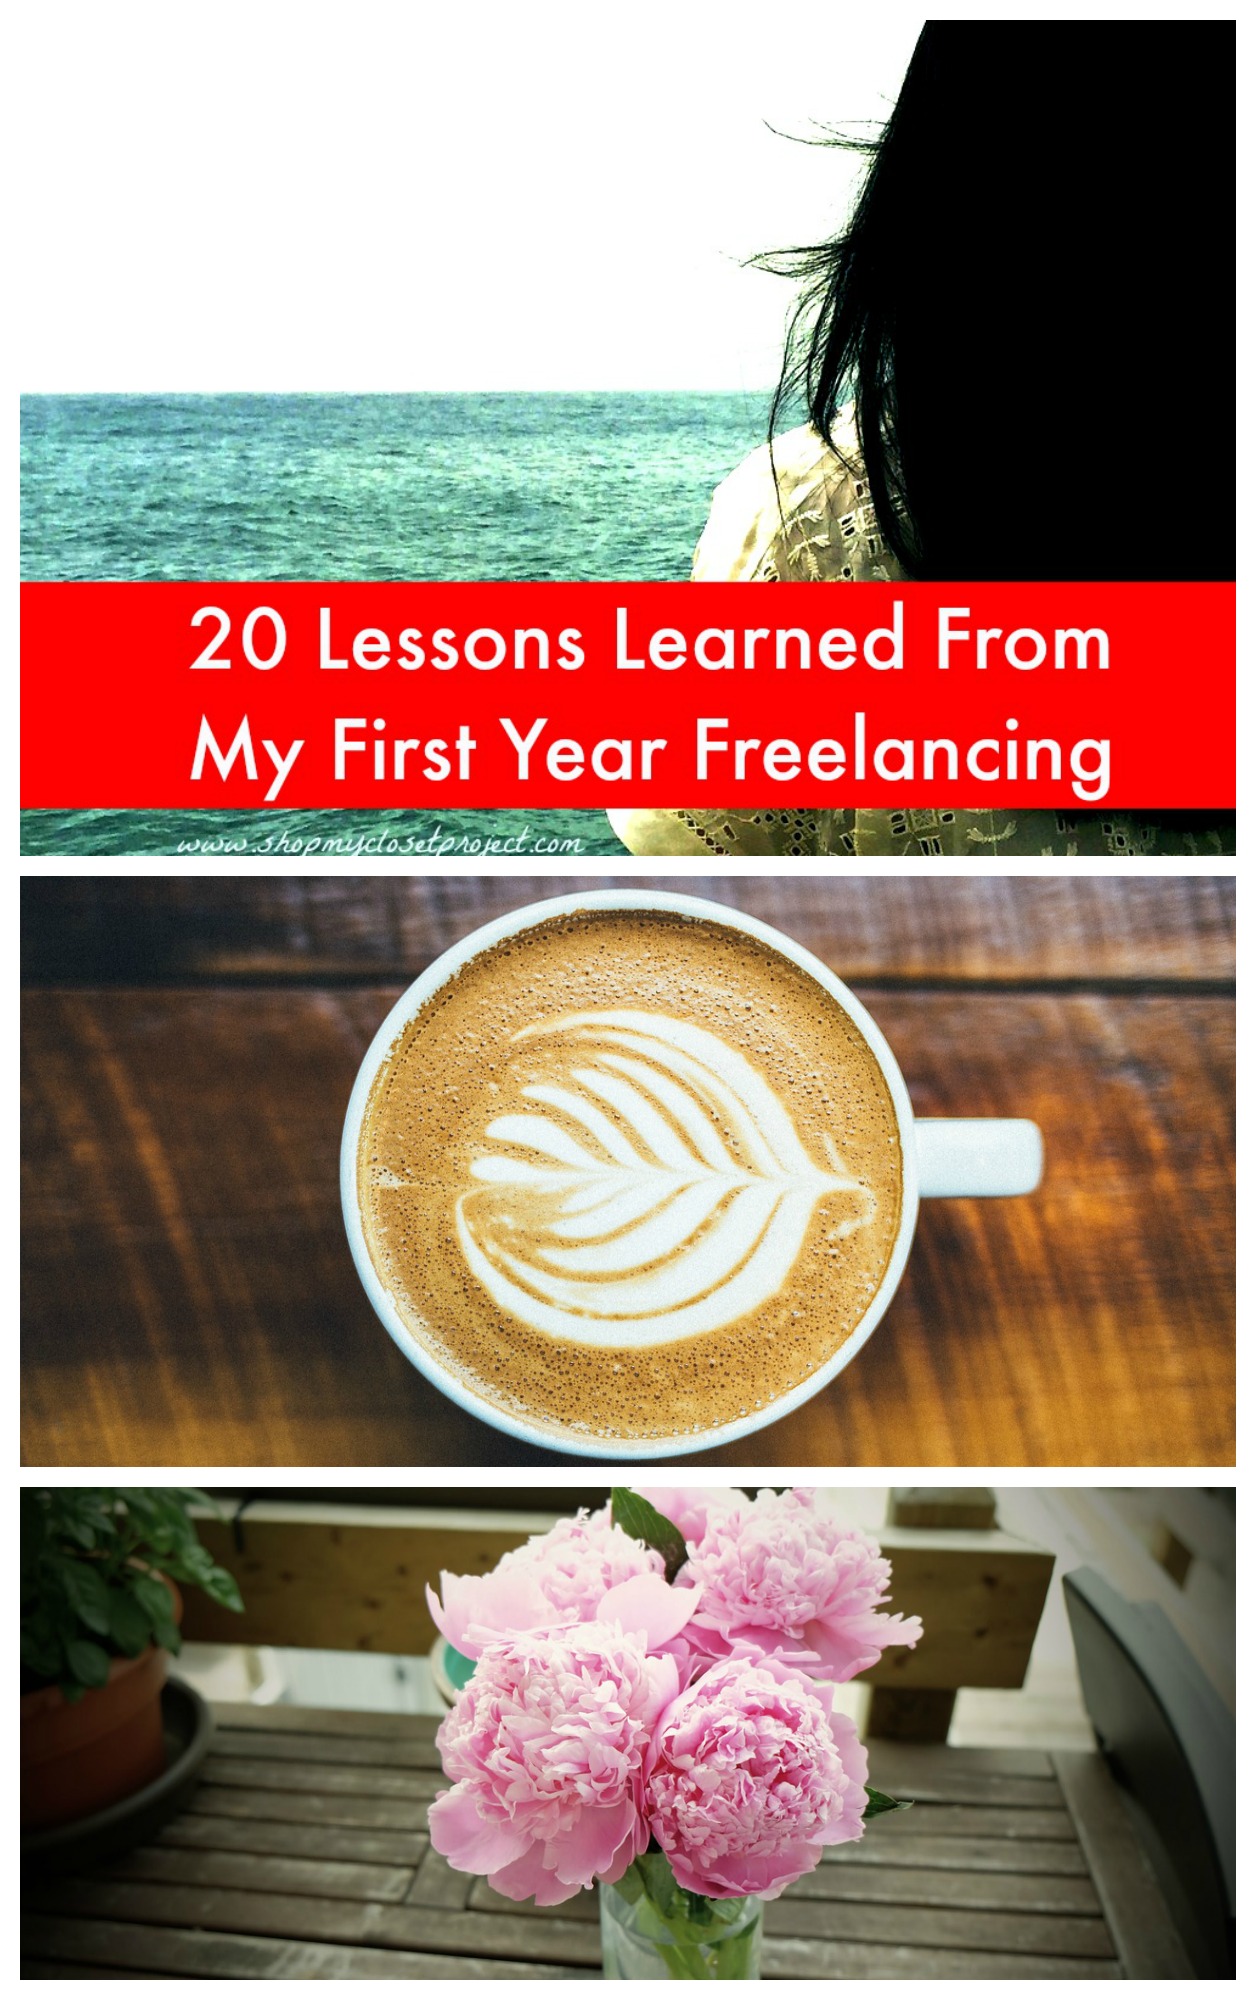 20 Lessons Learned From My First Year Freelancing